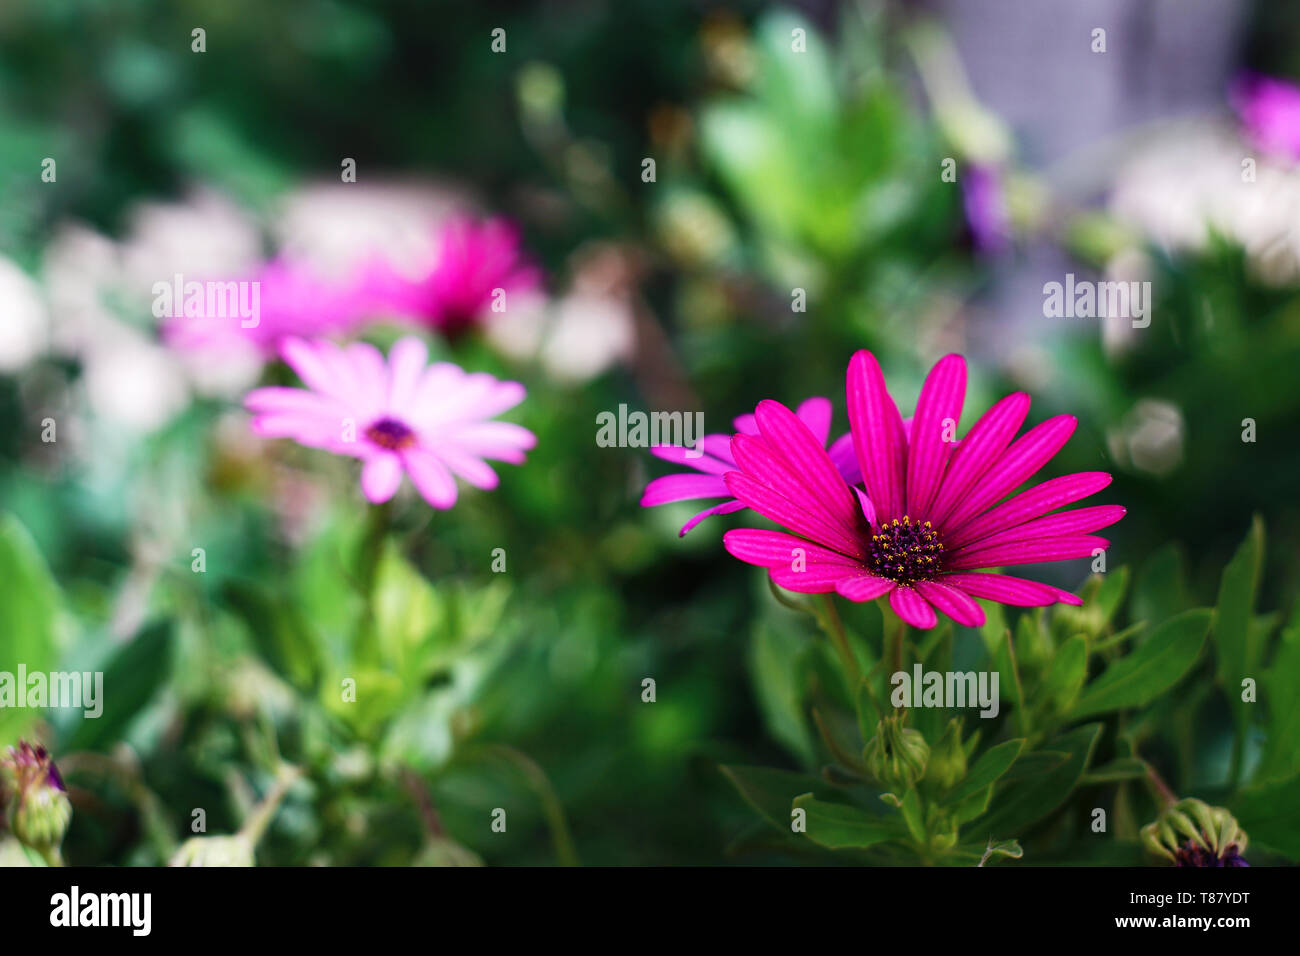 Pink daisy flower with a purple center Stock Photo